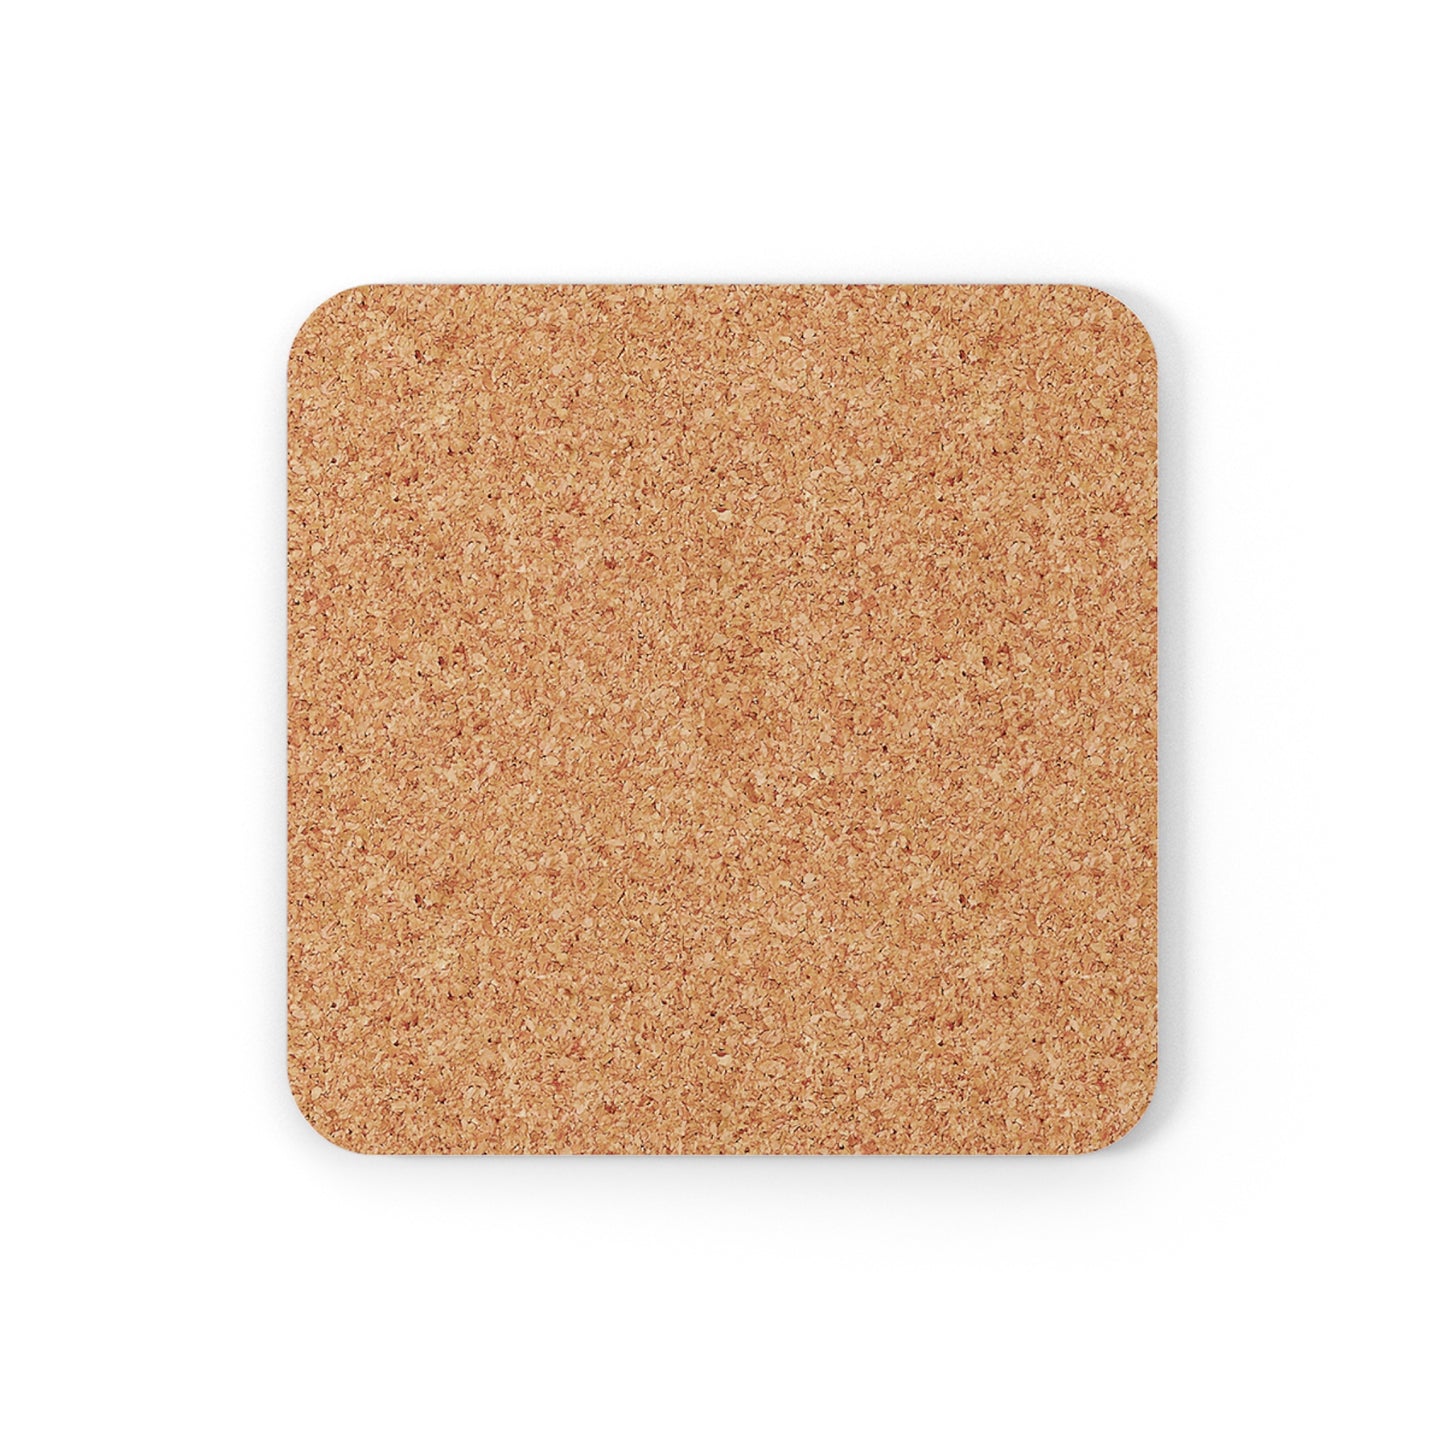 The back of the coaster, made of 100% cork material.